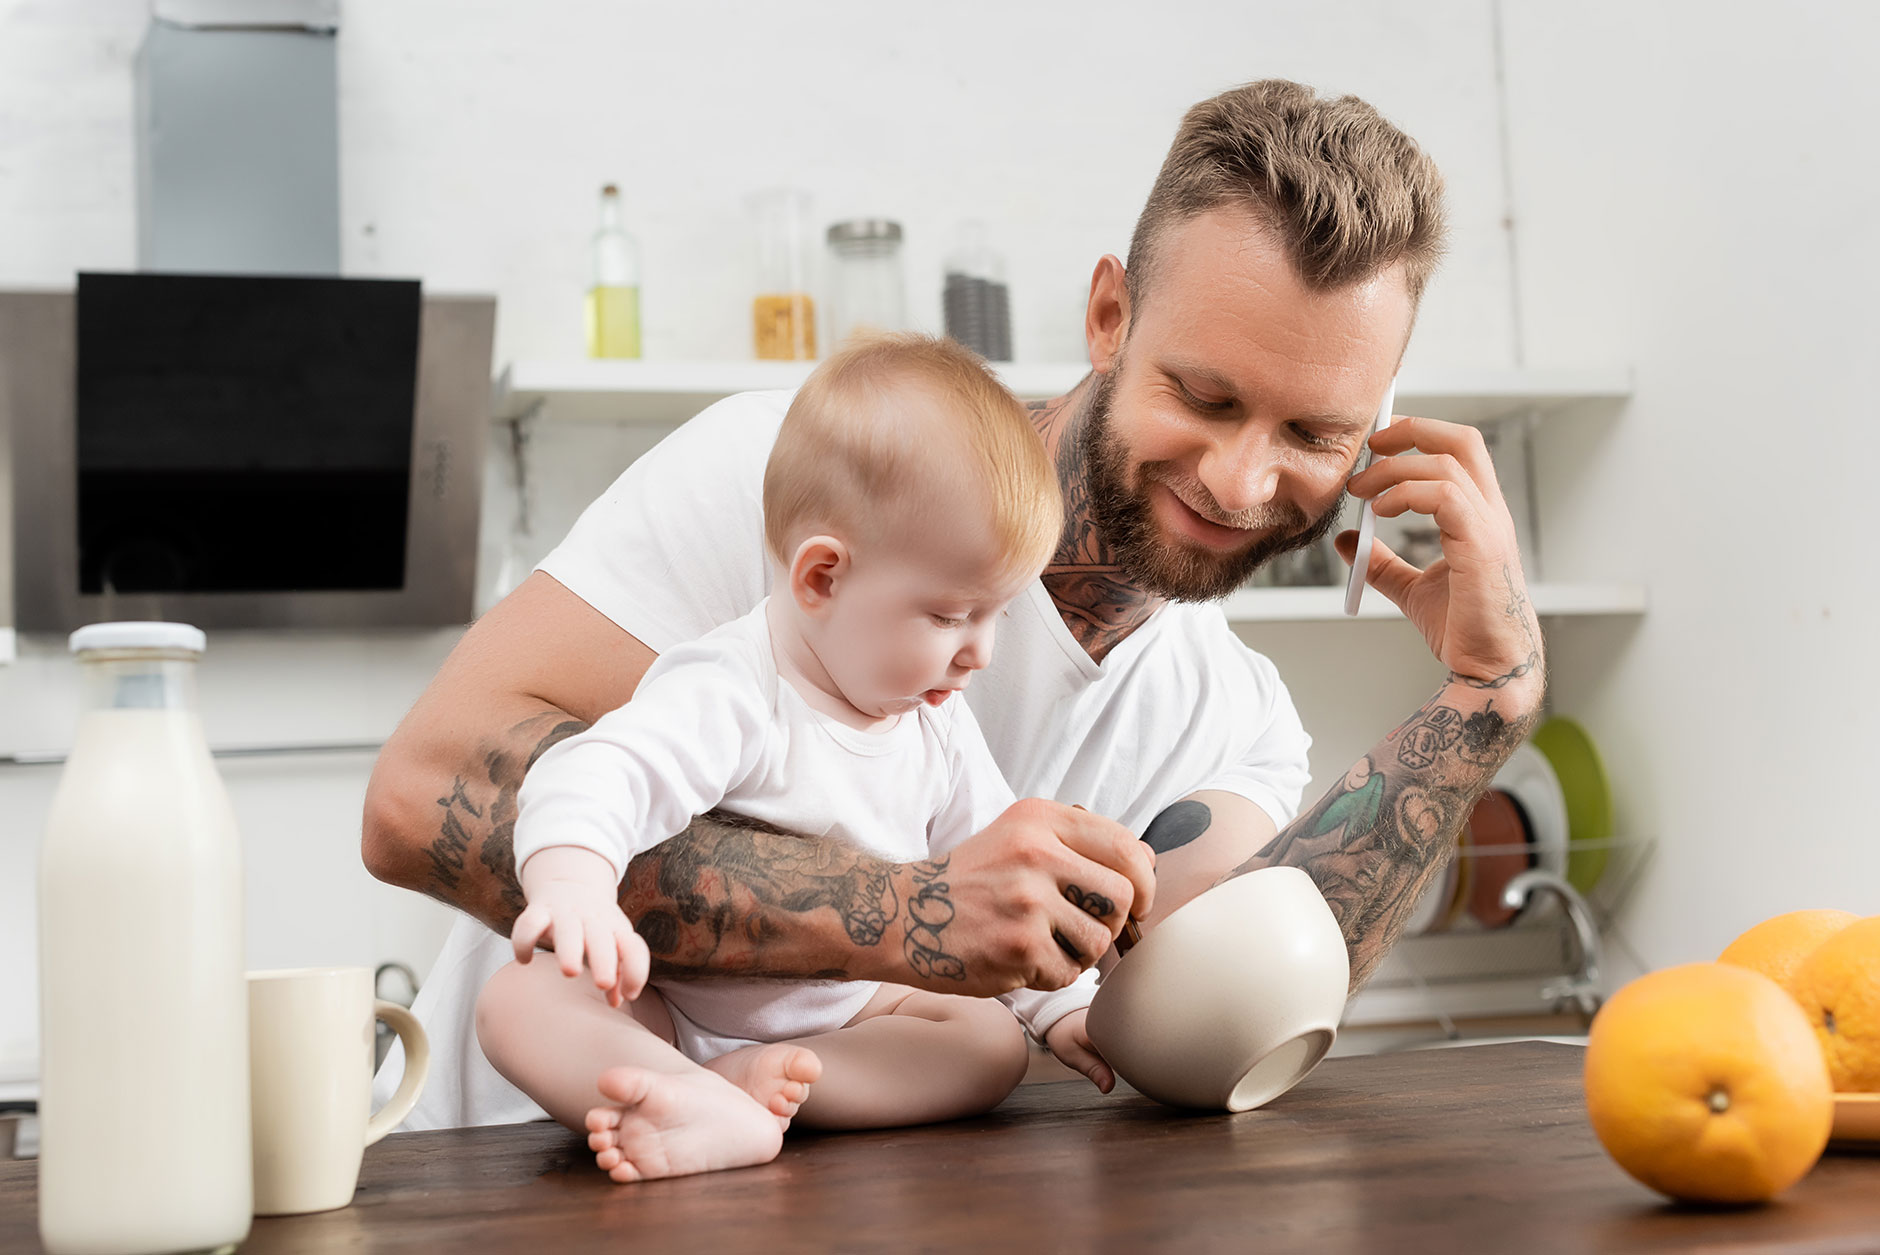 42264002-young-tattooed-man-talking-on-smartphone-near-infant-son.jpg